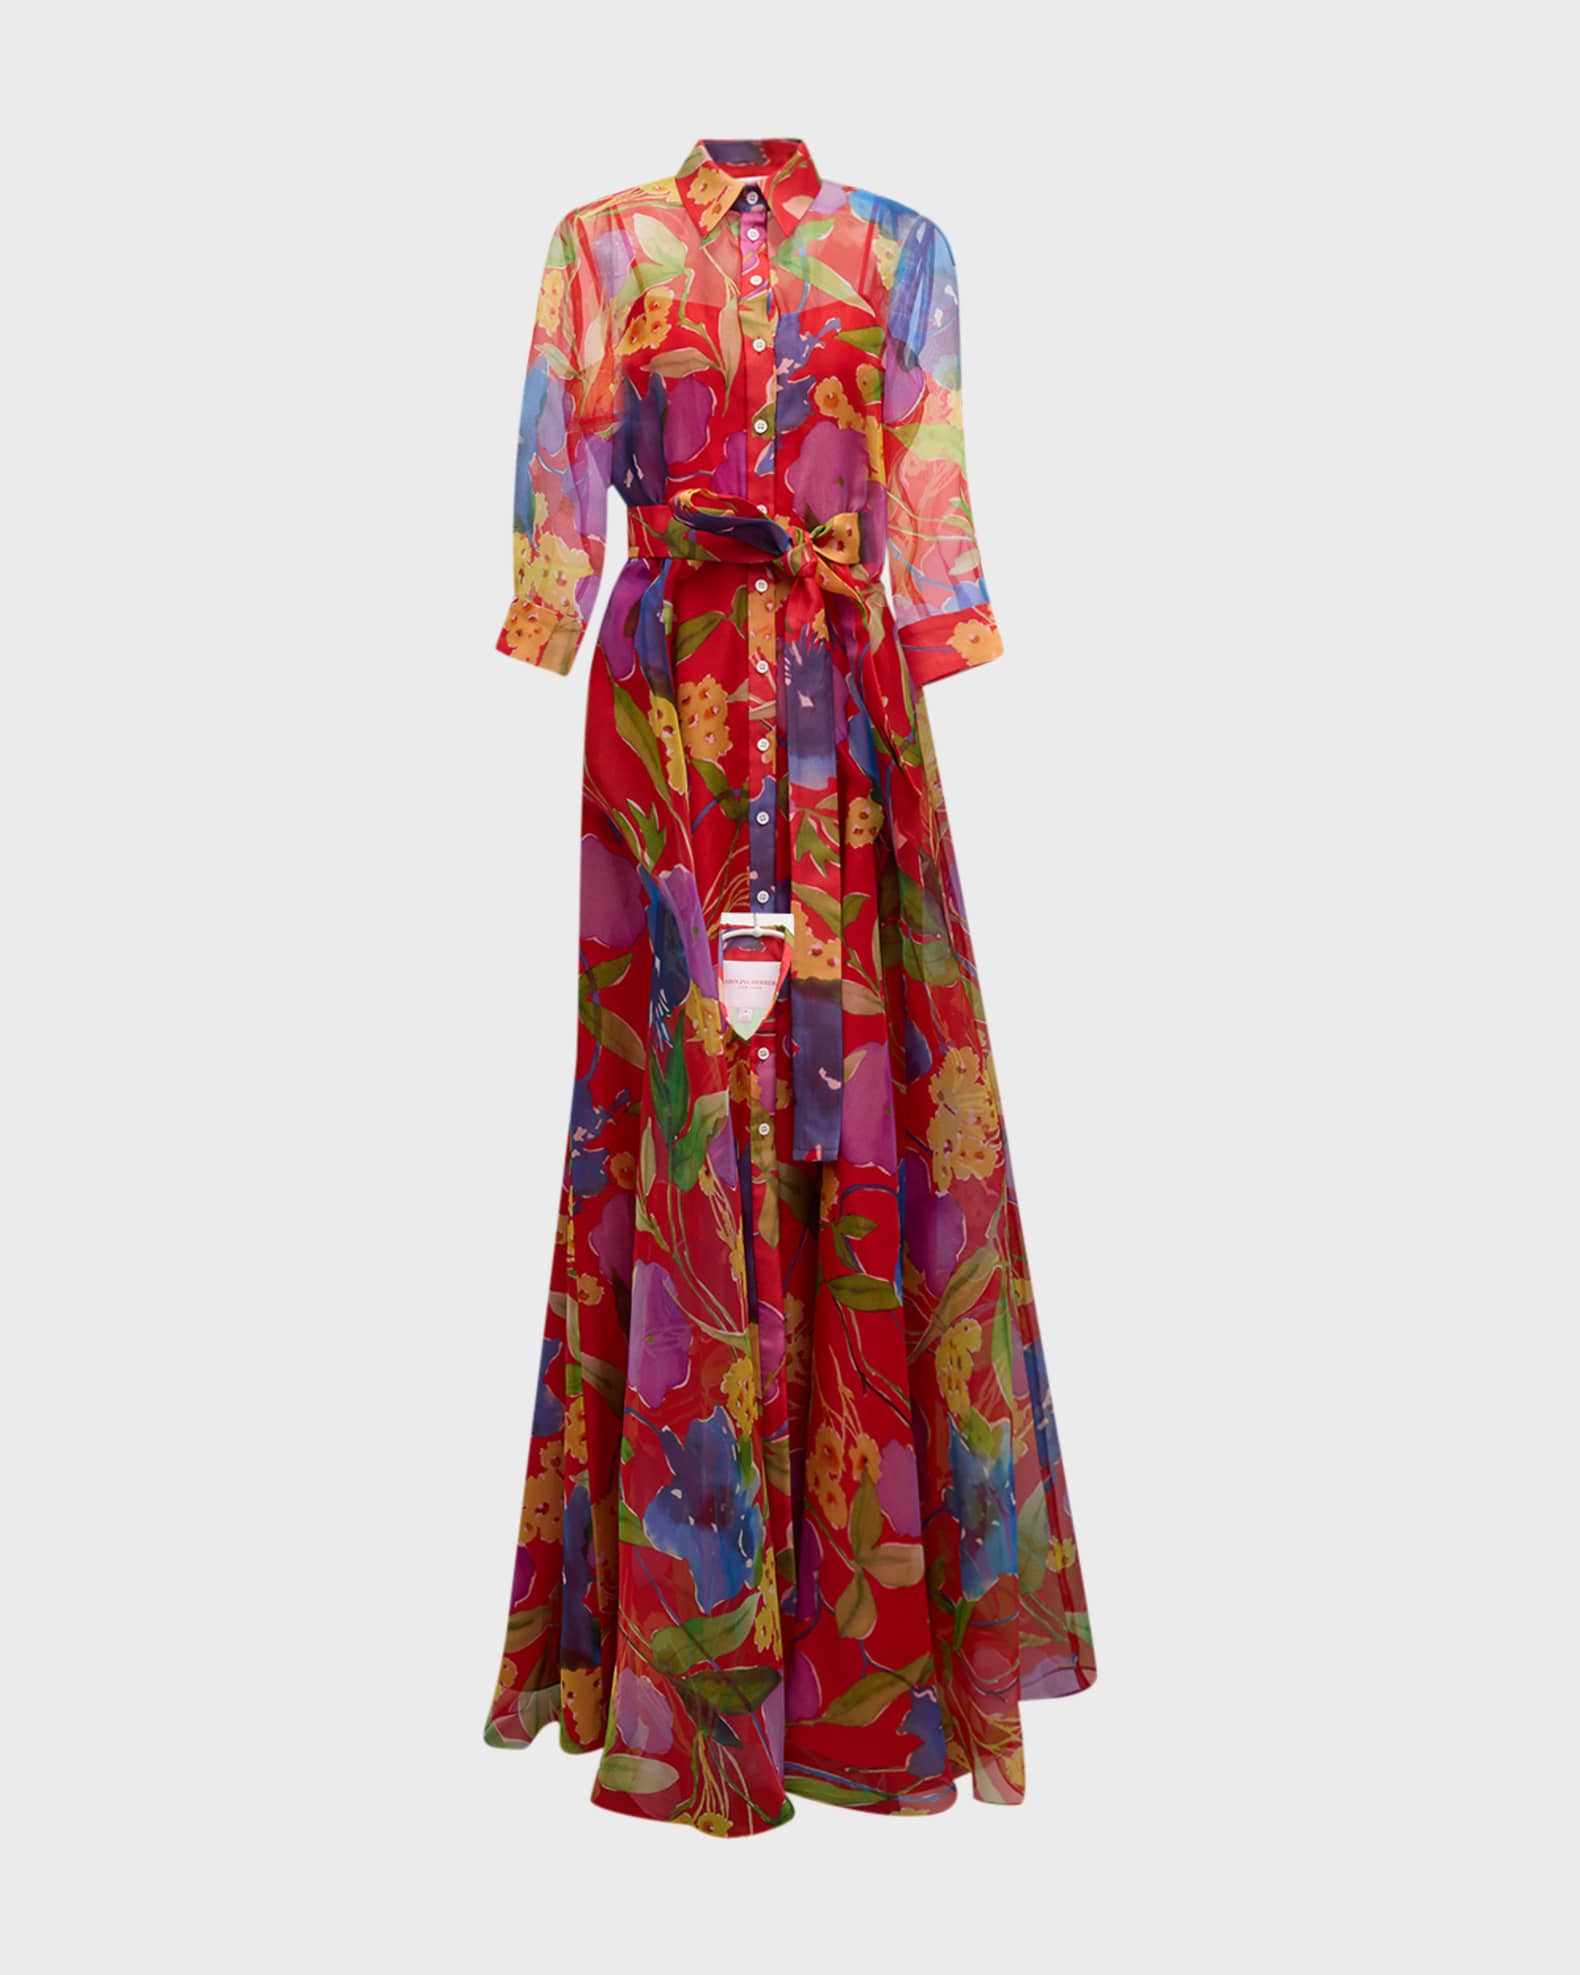 Carolina Herrera Floral-Print Belted Trench Gown | Neiman Marcus